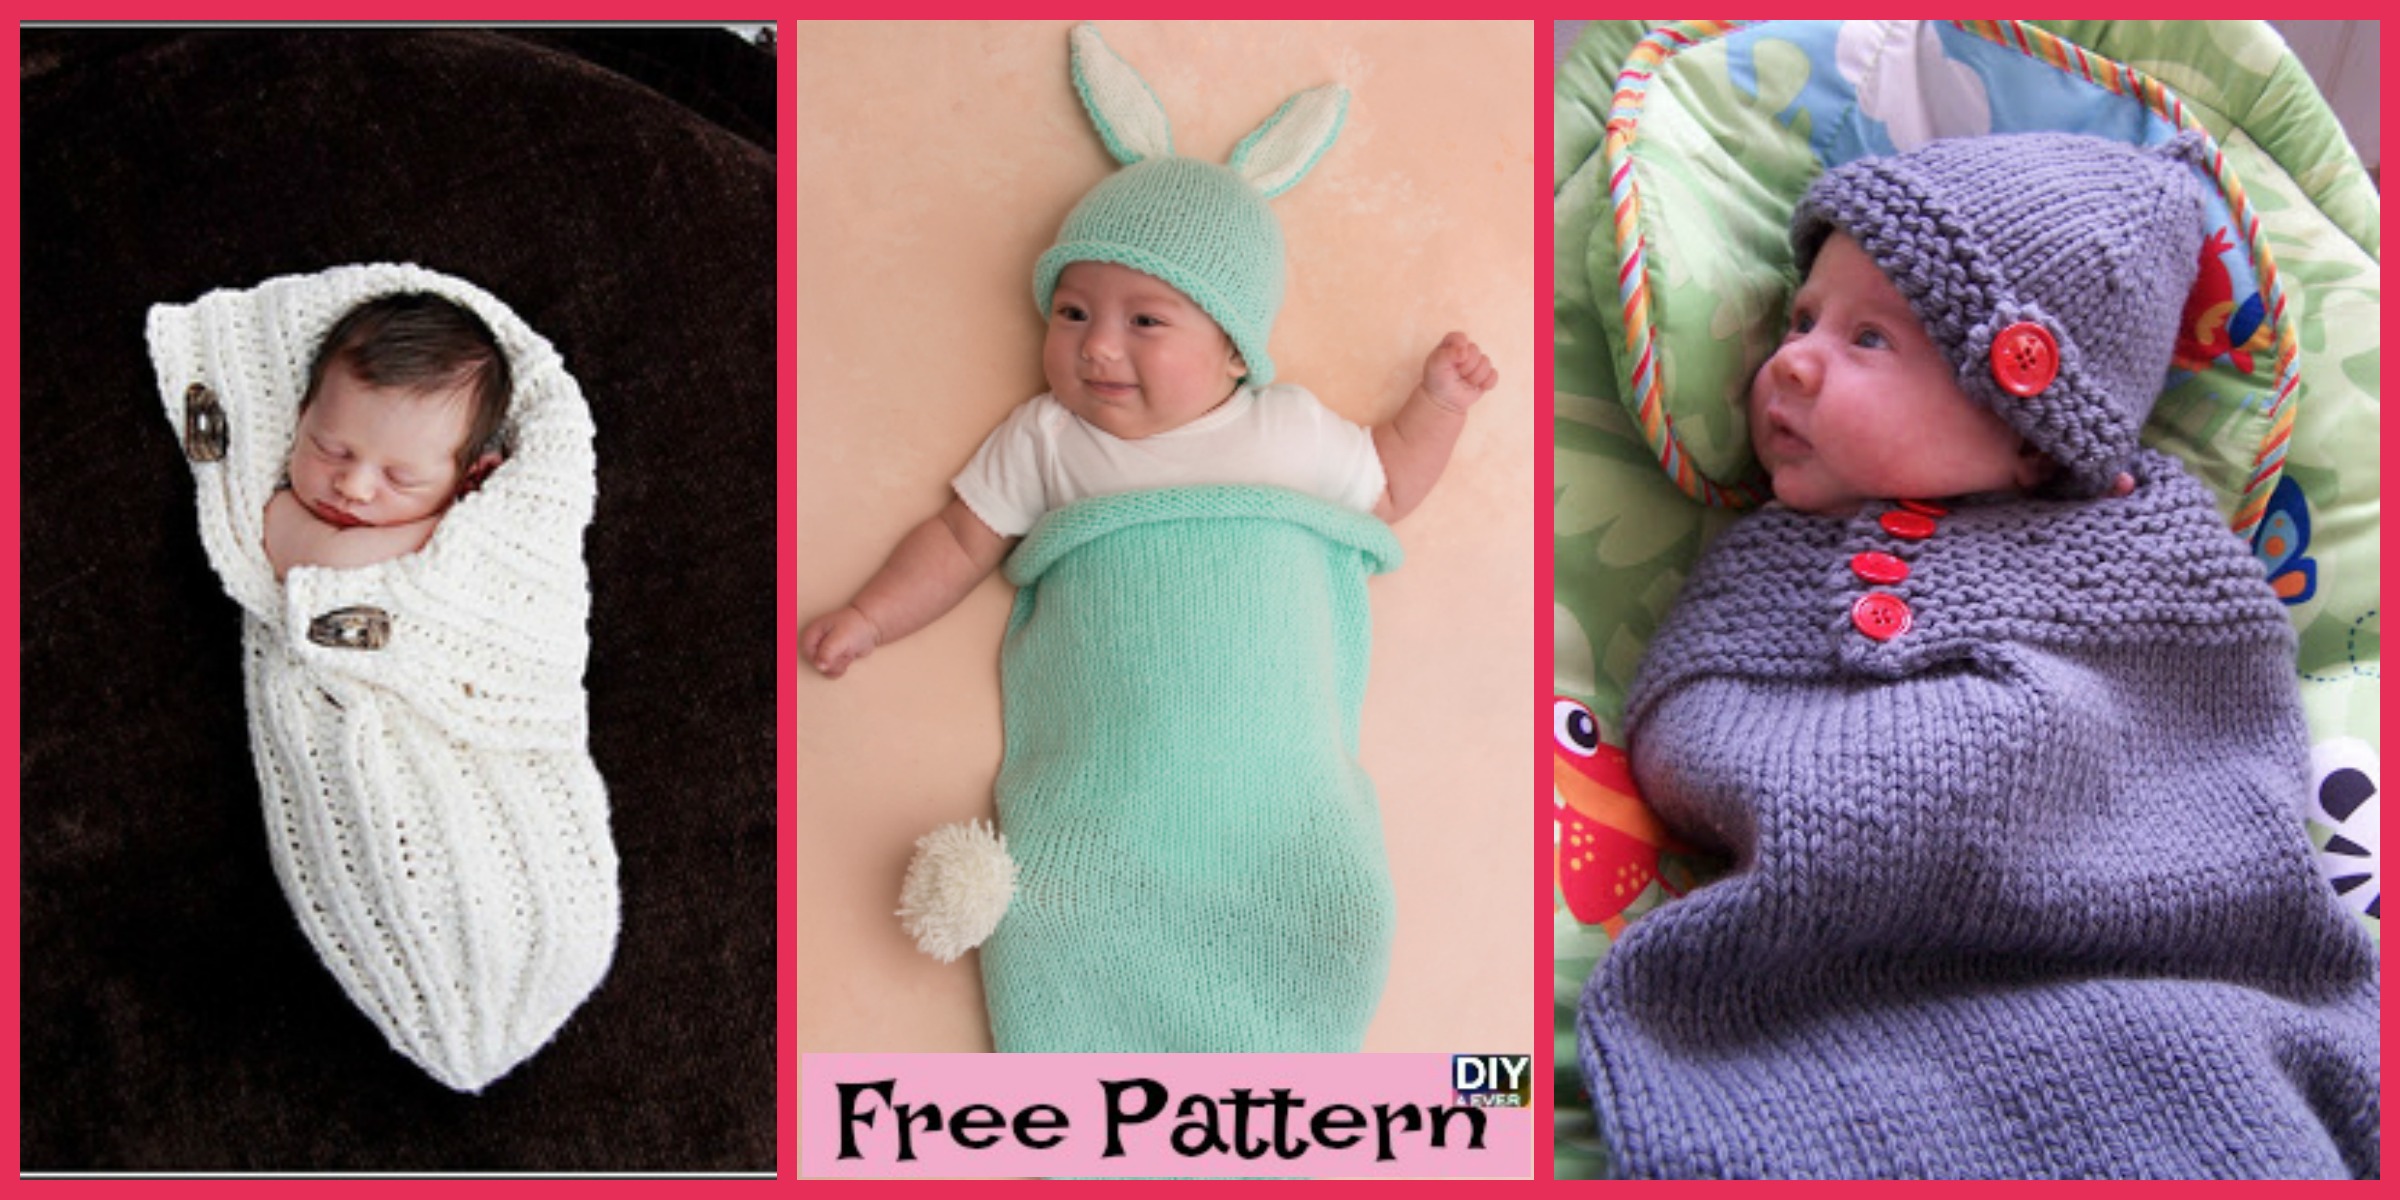 diy4ever-Adorable Knitted Baby Cocoons - Free Patterns